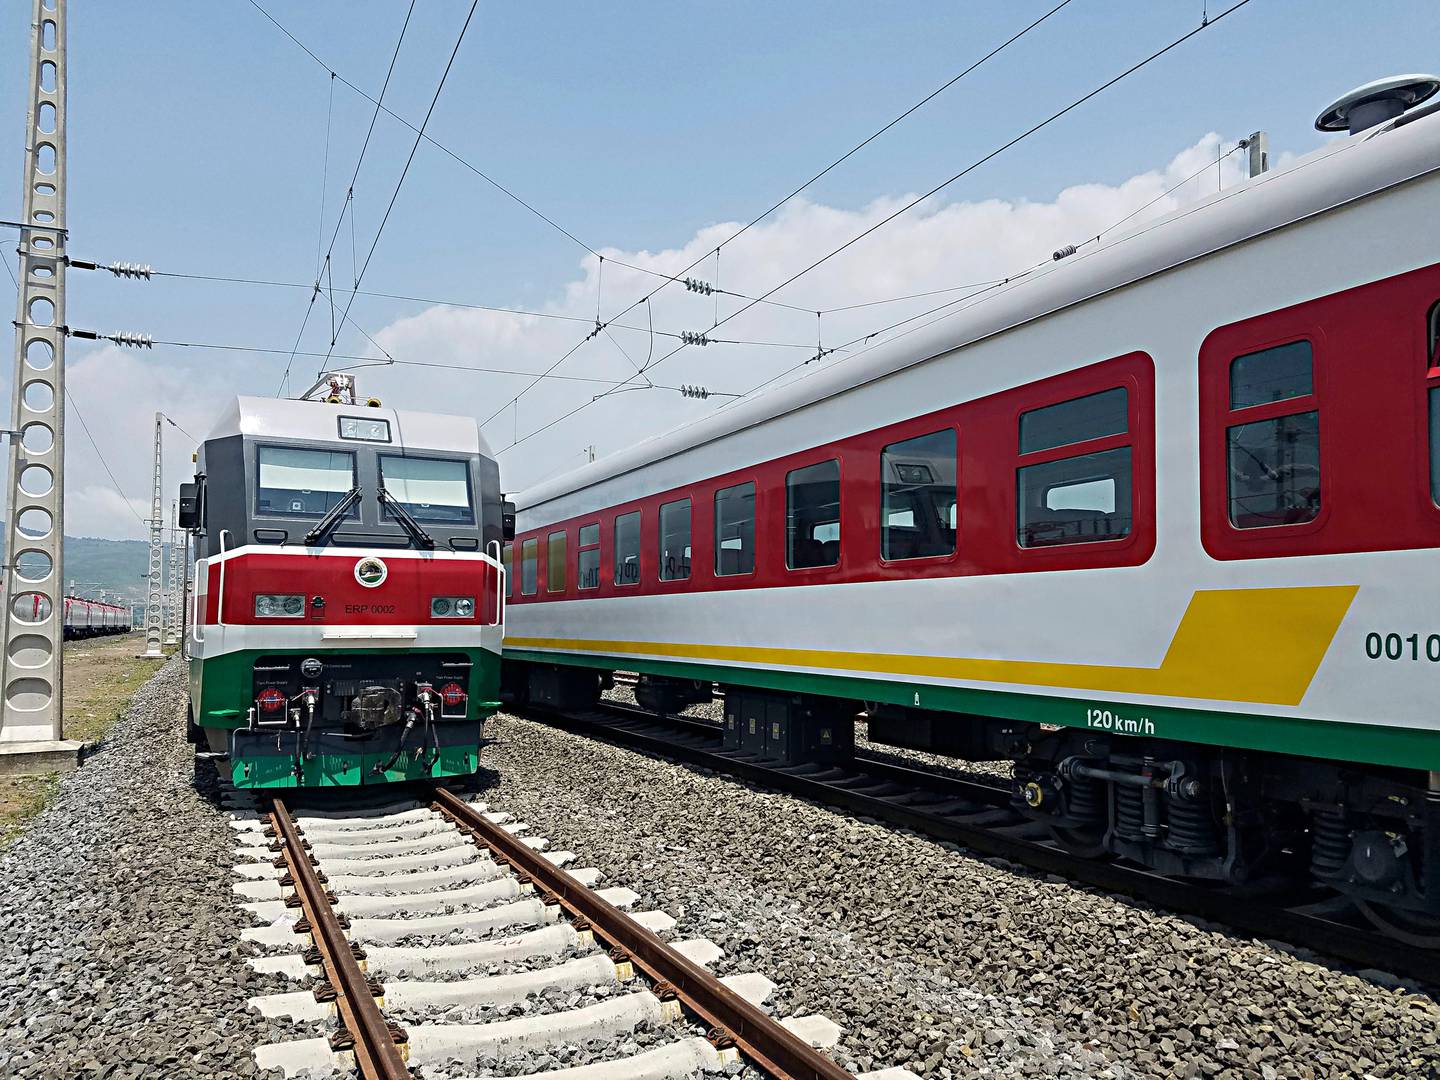 In this photo of Saturday, Sept.24, 2016, locomotives for the new Ethiopia to Djibouti electric railway system queue outside a train station in the outskirts of Addis Ababa. One of Africa's best-performing economies on Wednesday launched its latest massive infrastructure project, a railway linking the landlocked country with a major port on the Gulf of Aden. But it came just days after dozens were killed in anti-government protests in the region the railway runs through. (AP Photo/Elias Meseret)